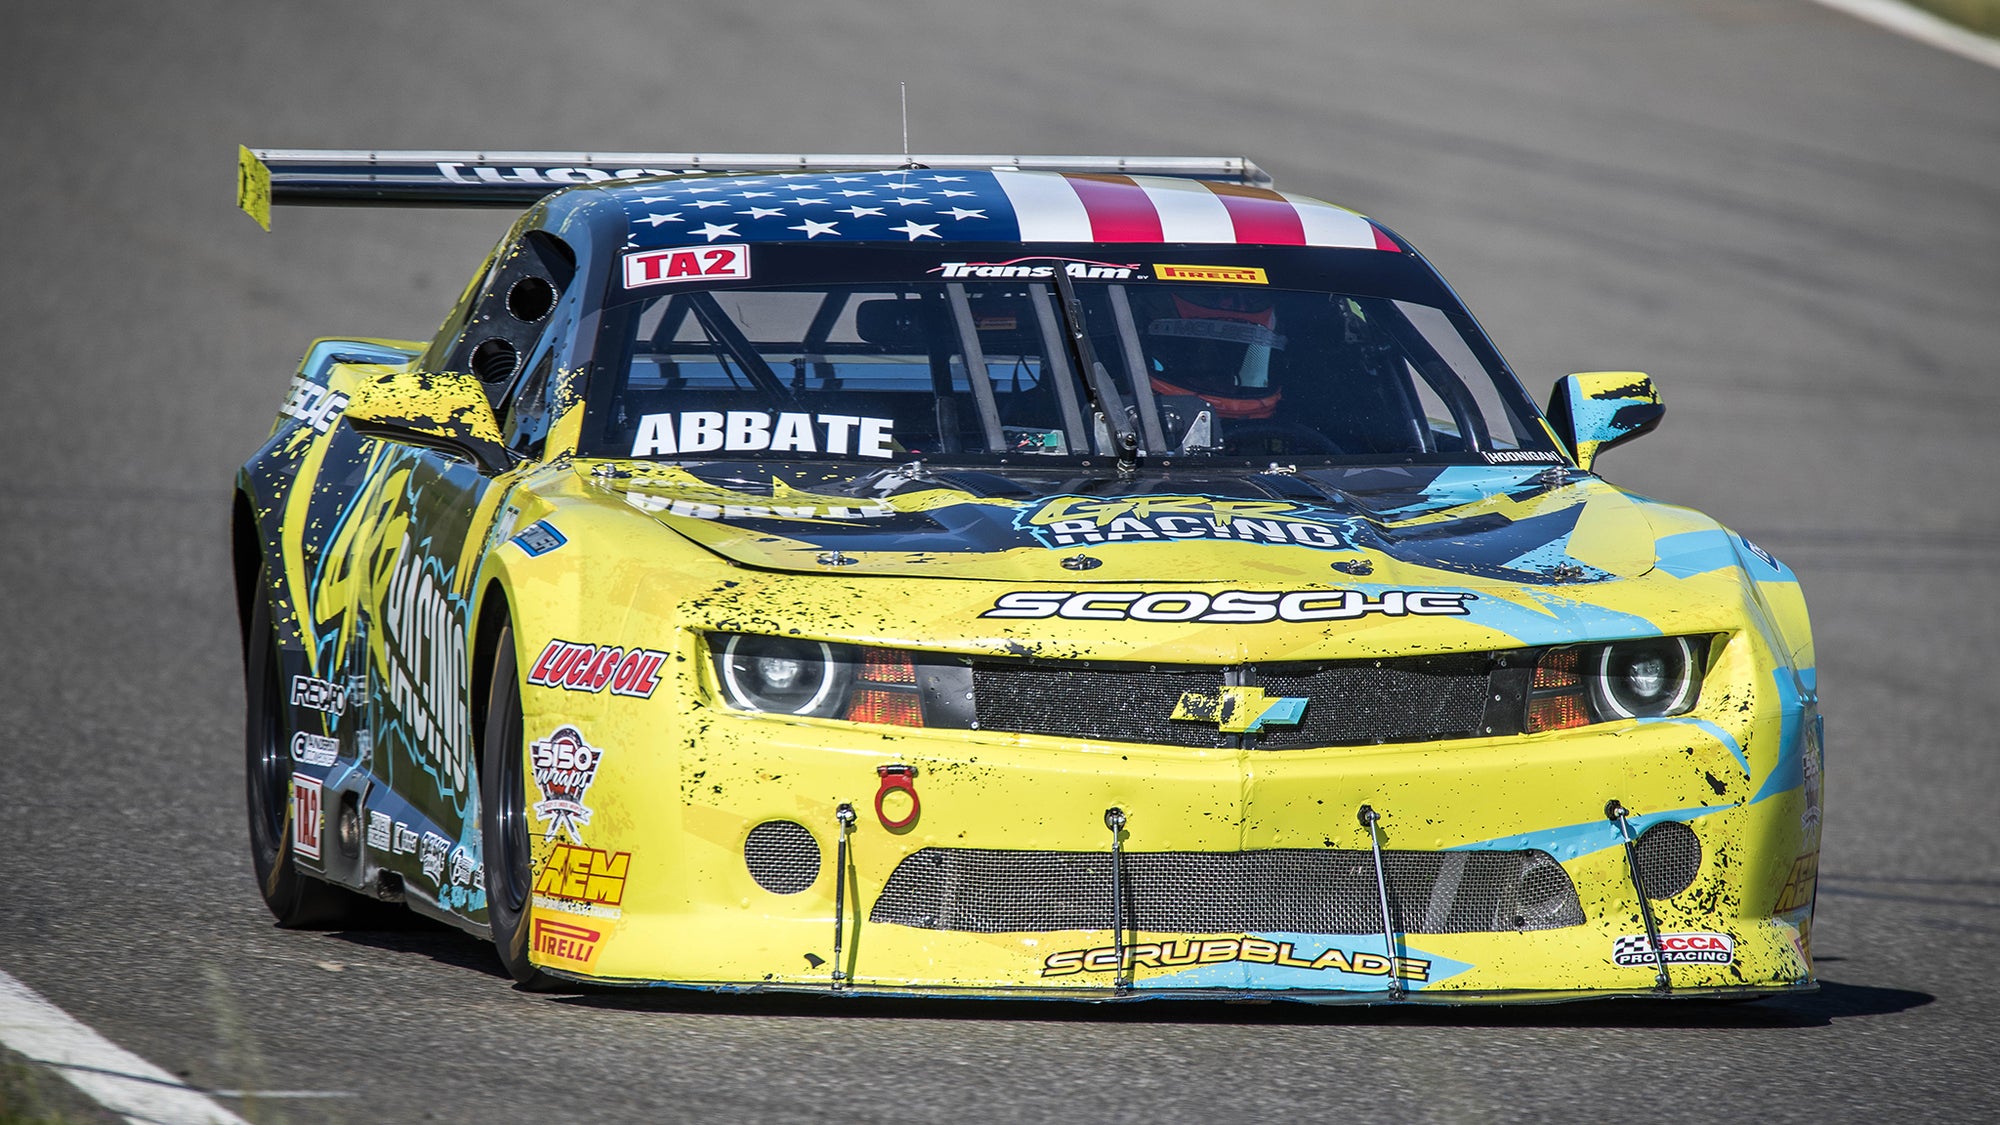 SCRUBBLADE SUPPORTS GRR RACING IN TRANS AM SERIES!